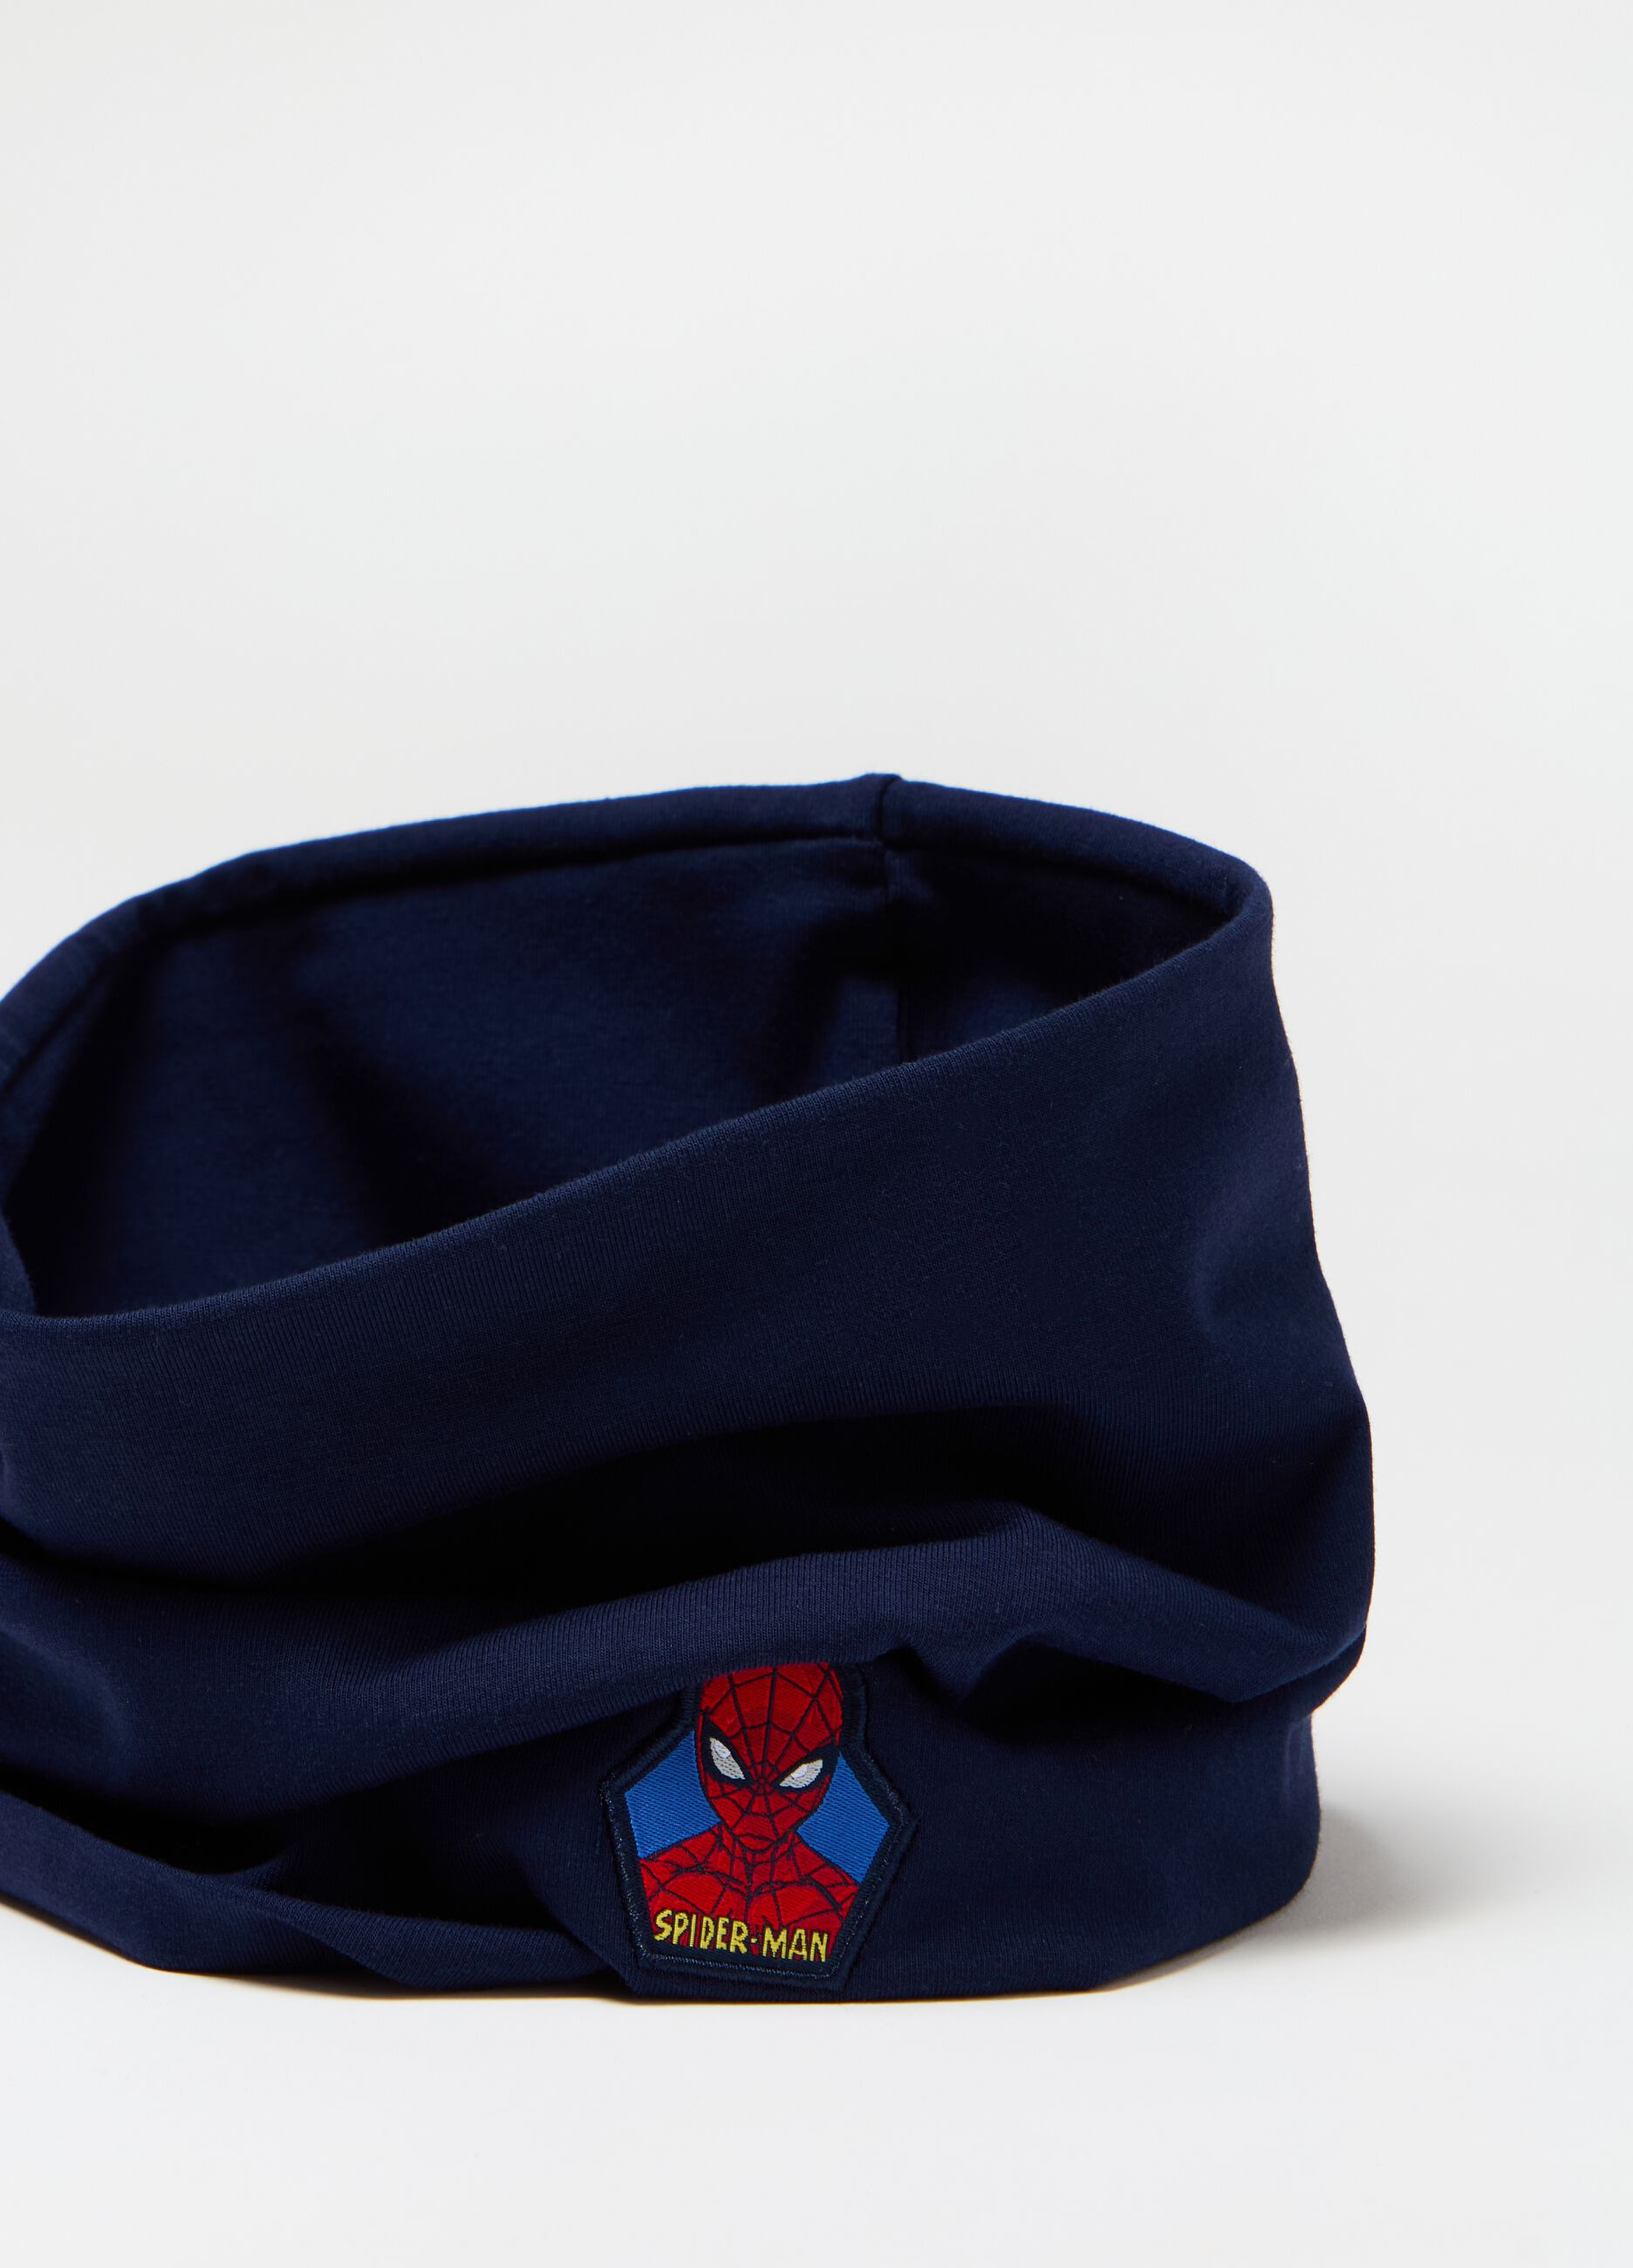 Stretch neck warmer with Spider-Man patch